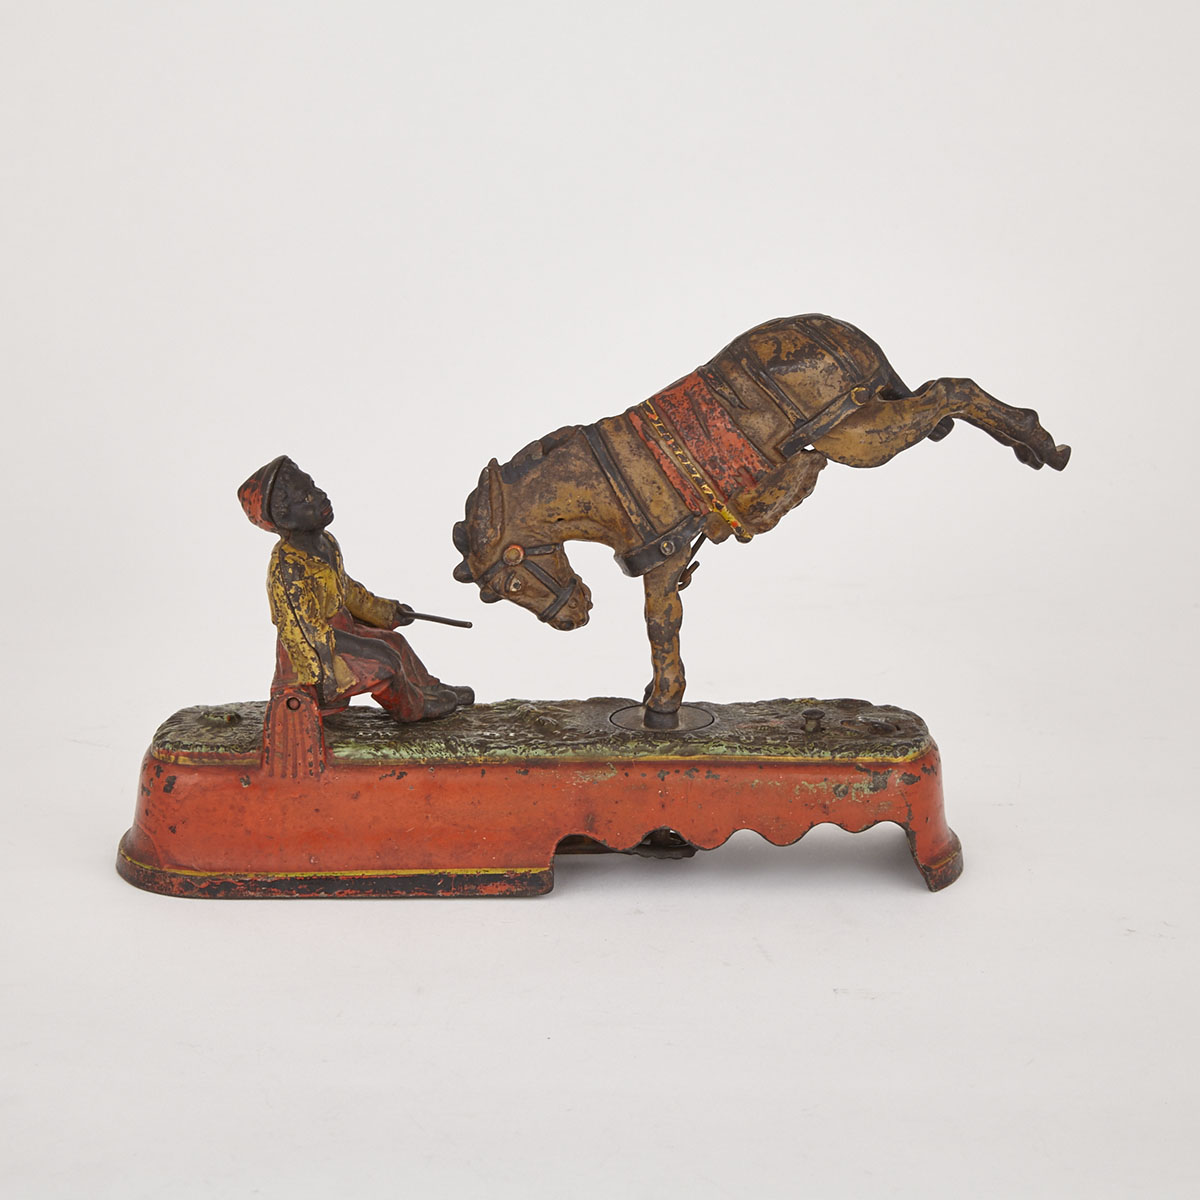 Painted Cast Iron ‘”Always Did ‘Spise a Mule” Mechanical Bank by J & E Stevens & Co., late 19th century